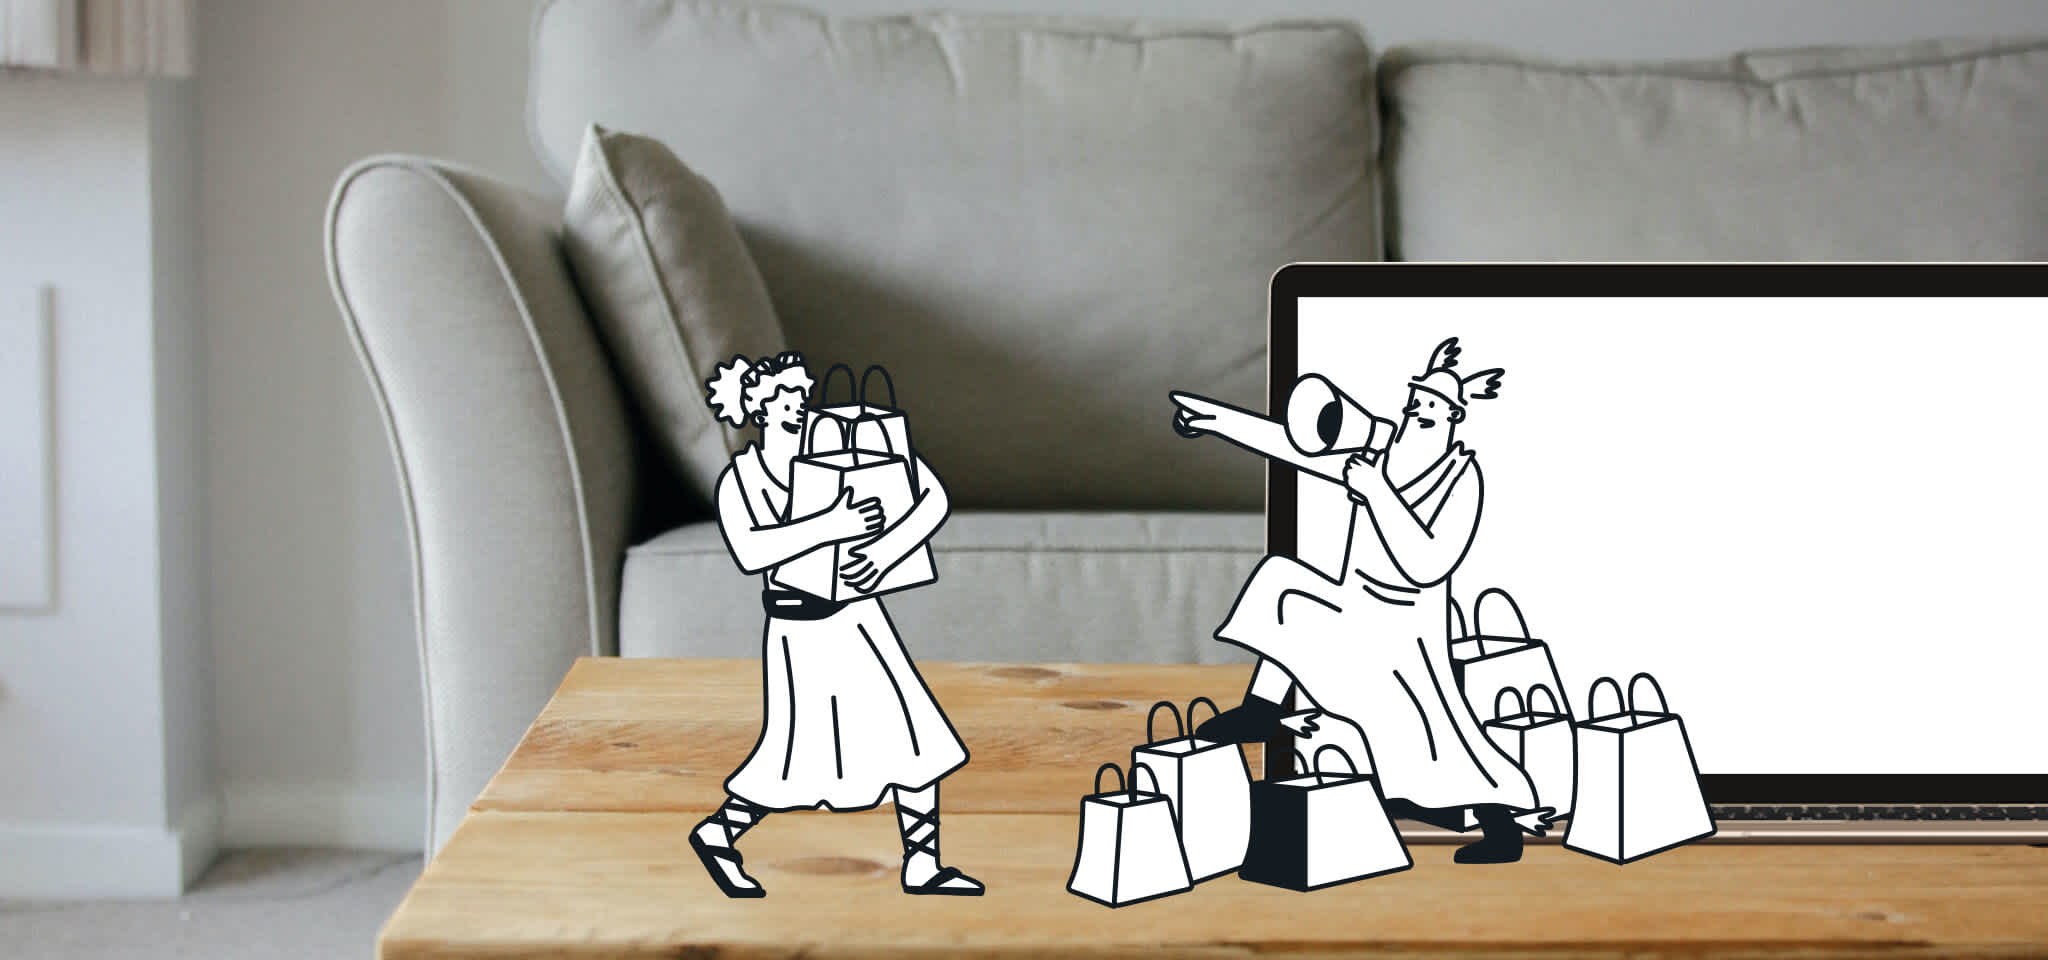 Hermes and a Goddess shopping in front of a sofa